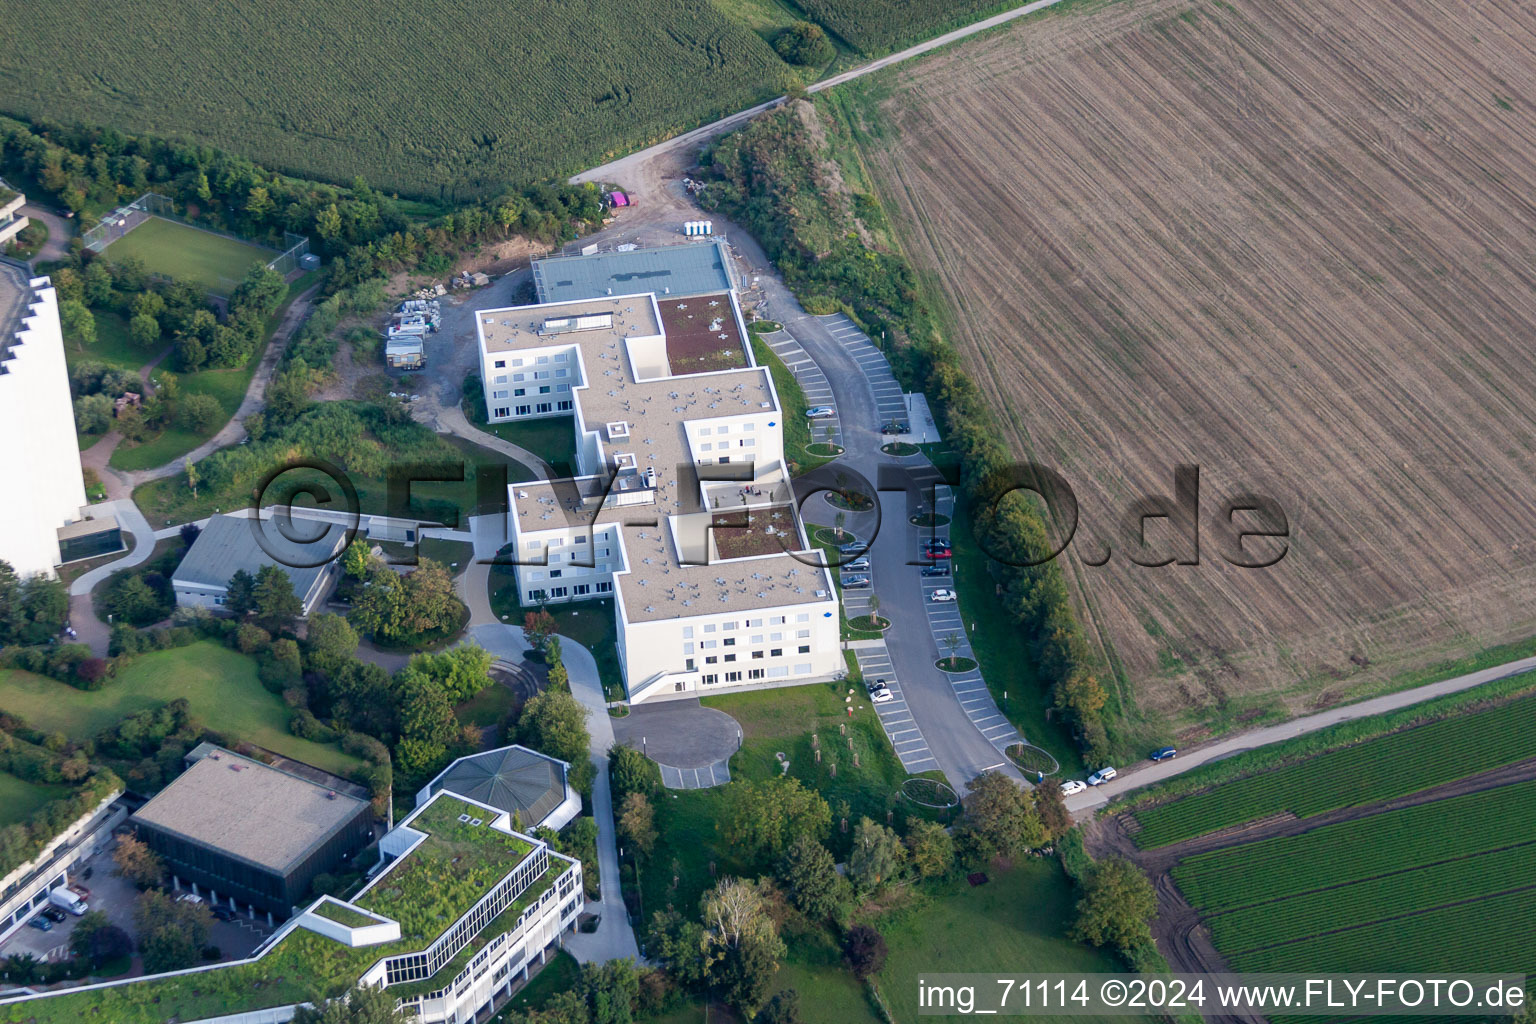 Aerial photograpy of BG accident clinic in the district Oggersheim in Ludwigshafen am Rhein in the state Rhineland-Palatinate, Germany